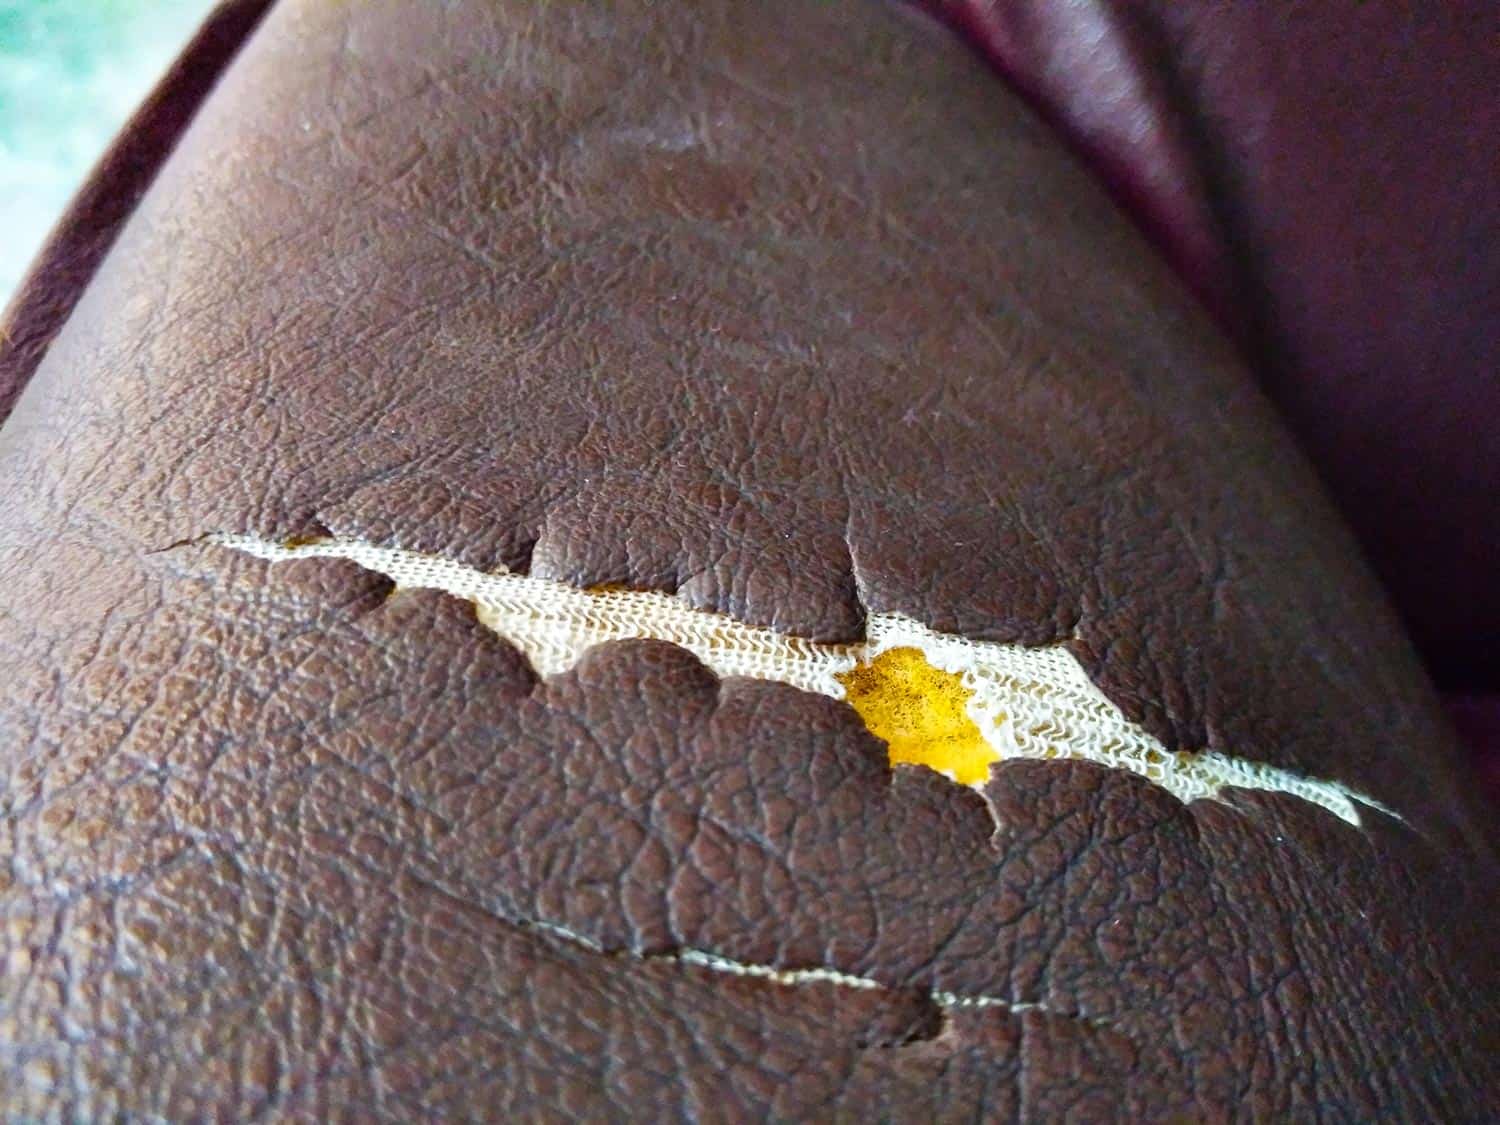 Crack spot on the arm-rest of an arm chair or sofa